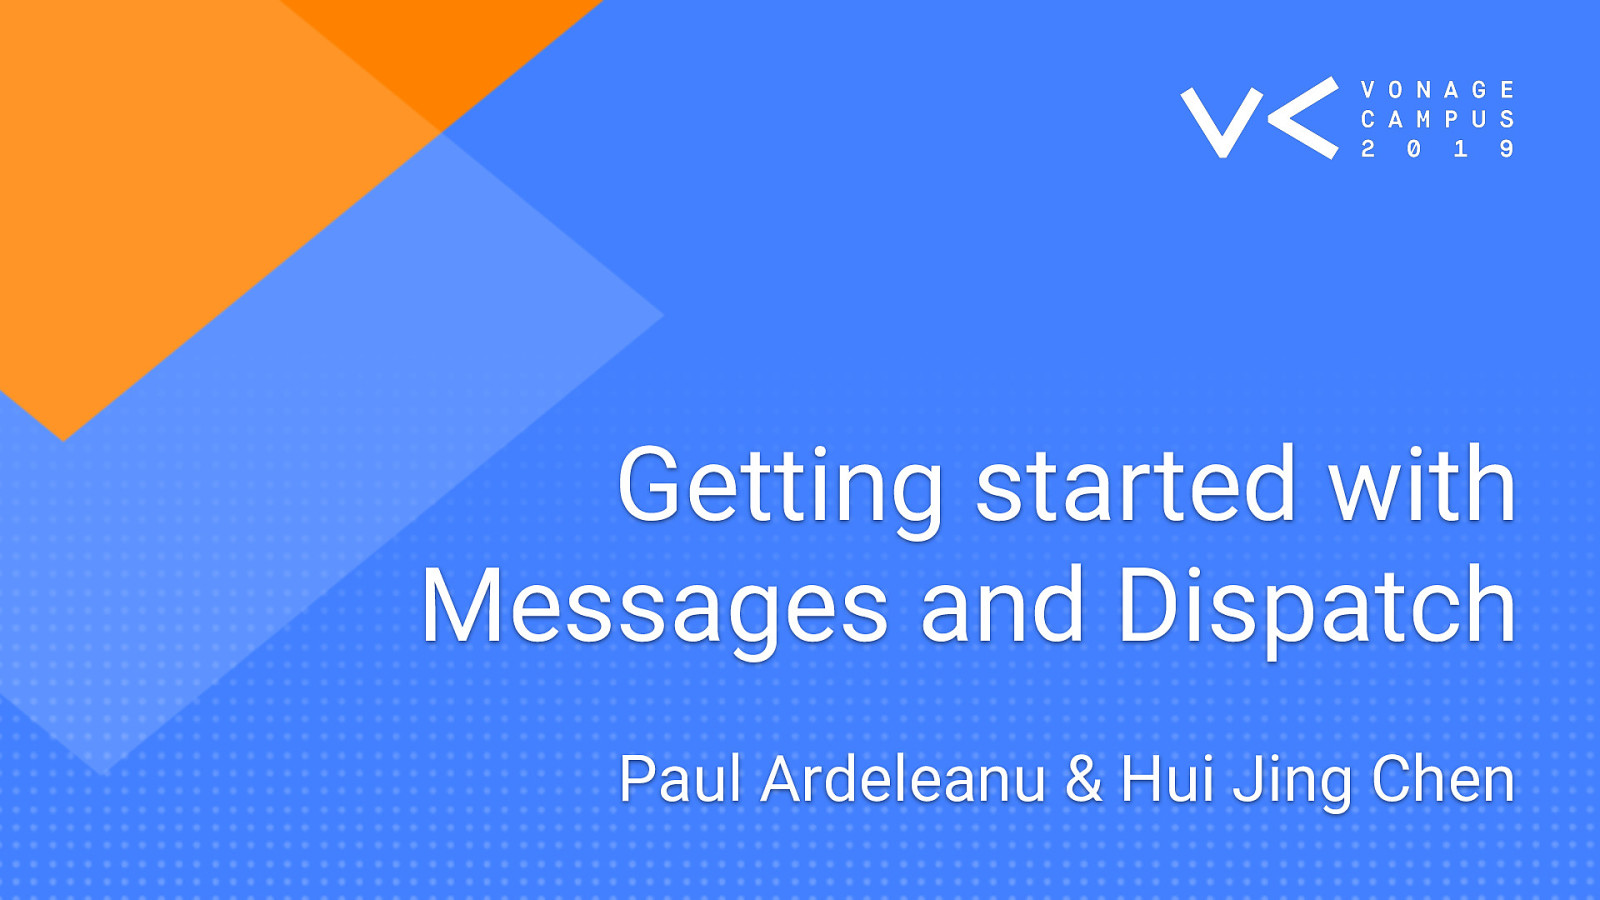 Getting started with Messages and Dispatch